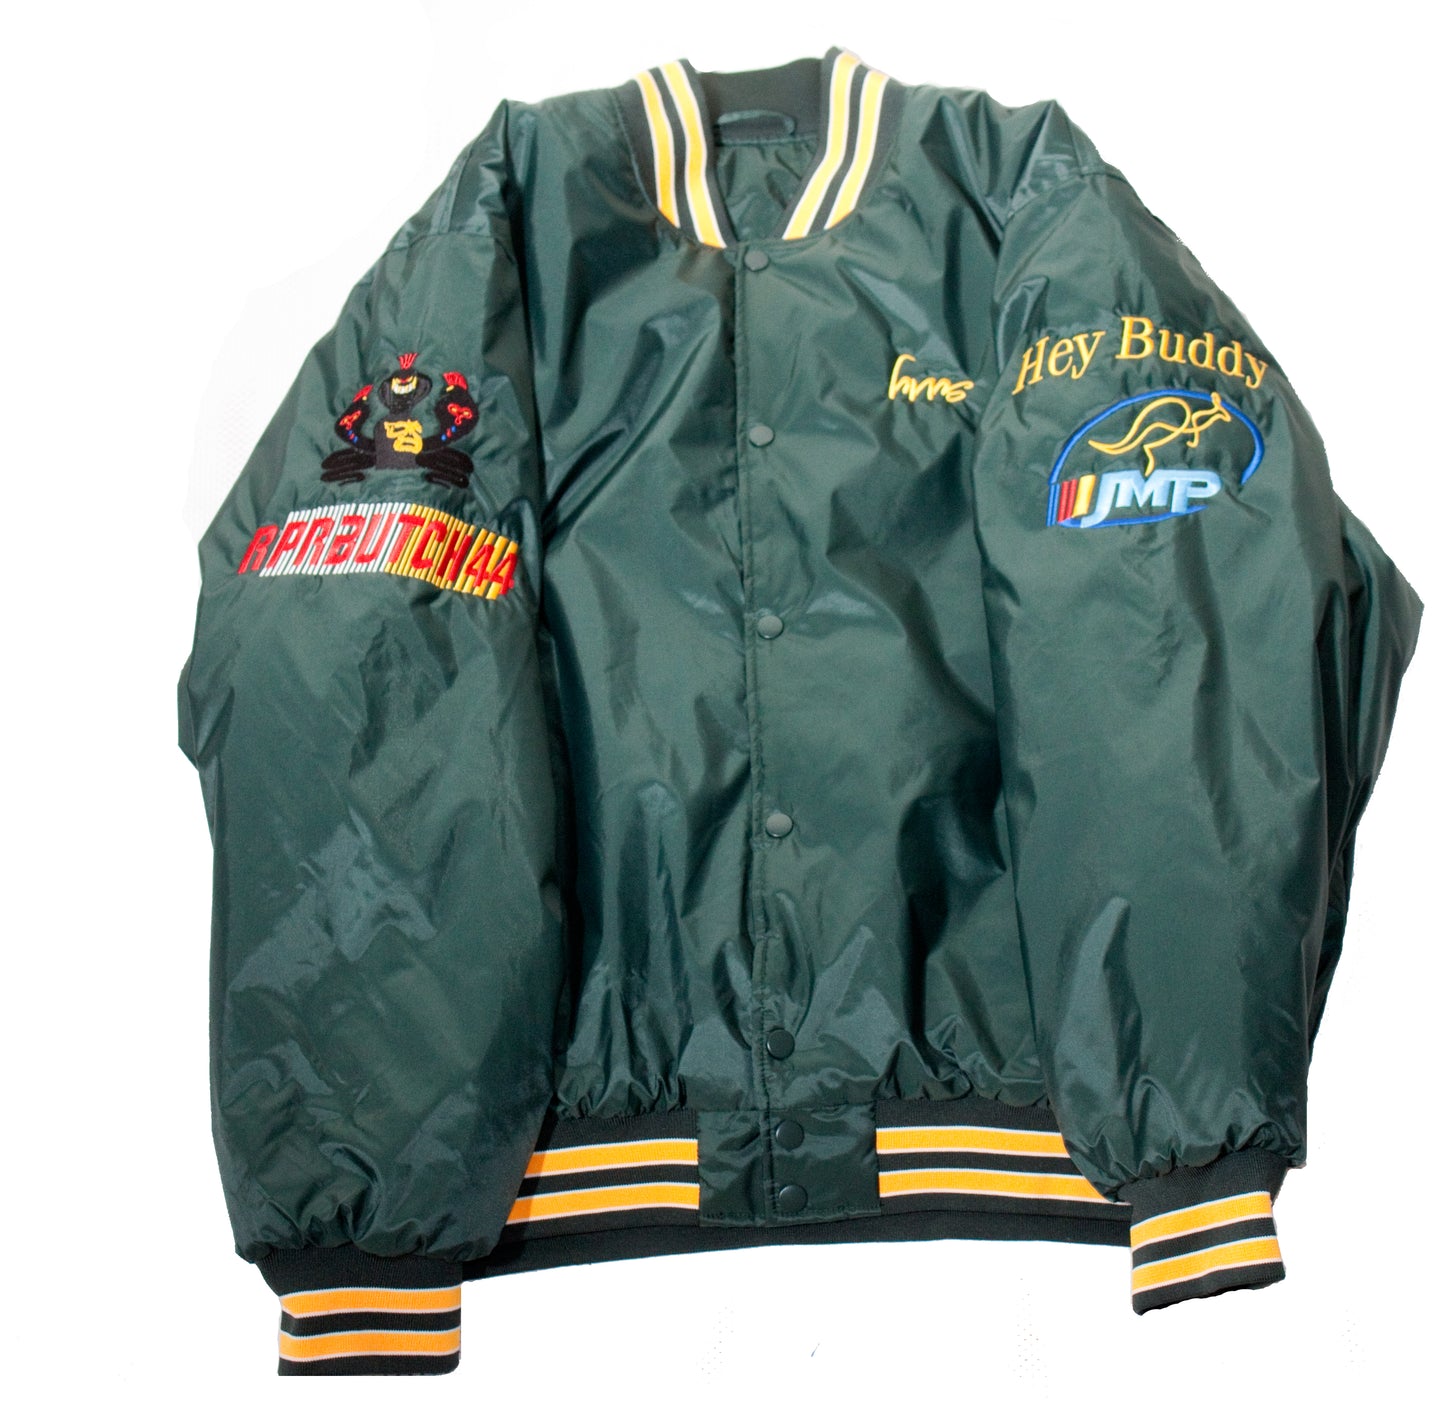 HVNS Heavy Racing Jacket Green